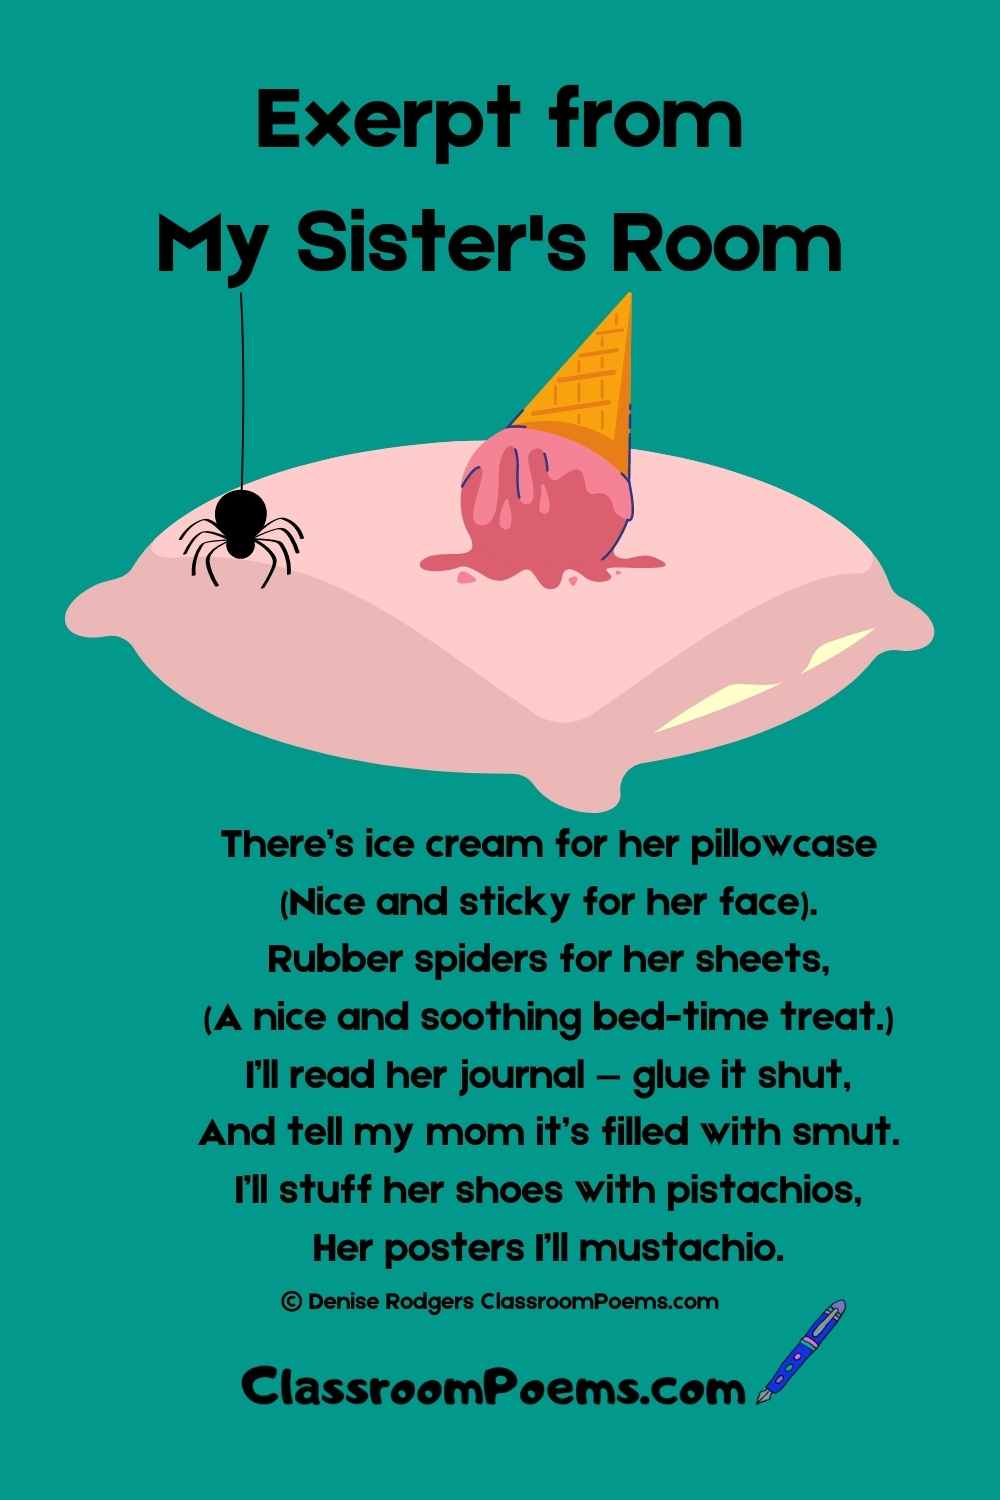 MY SISTER'S ROOM poem. Family poems by Denise Rodgers on ClassroomPoems.com.